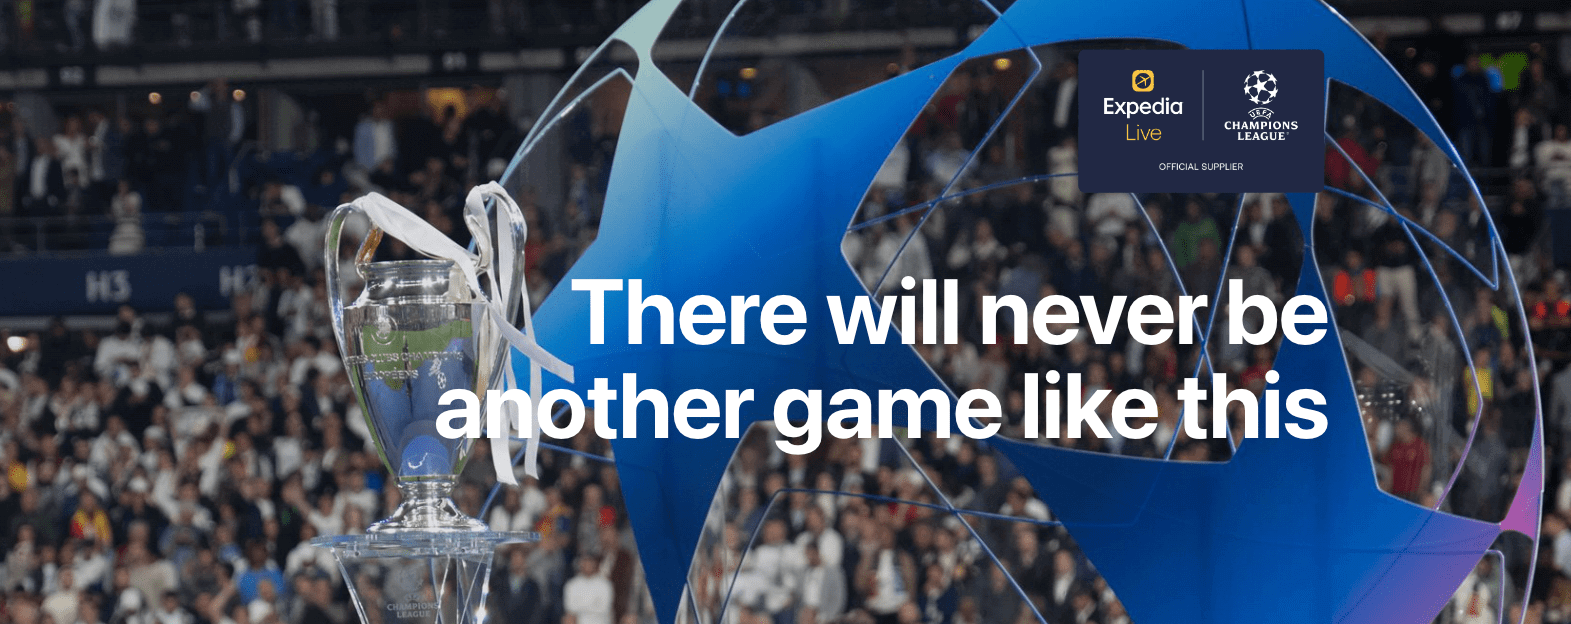 Win the ultimate UEFA Champions League experience with Expedia